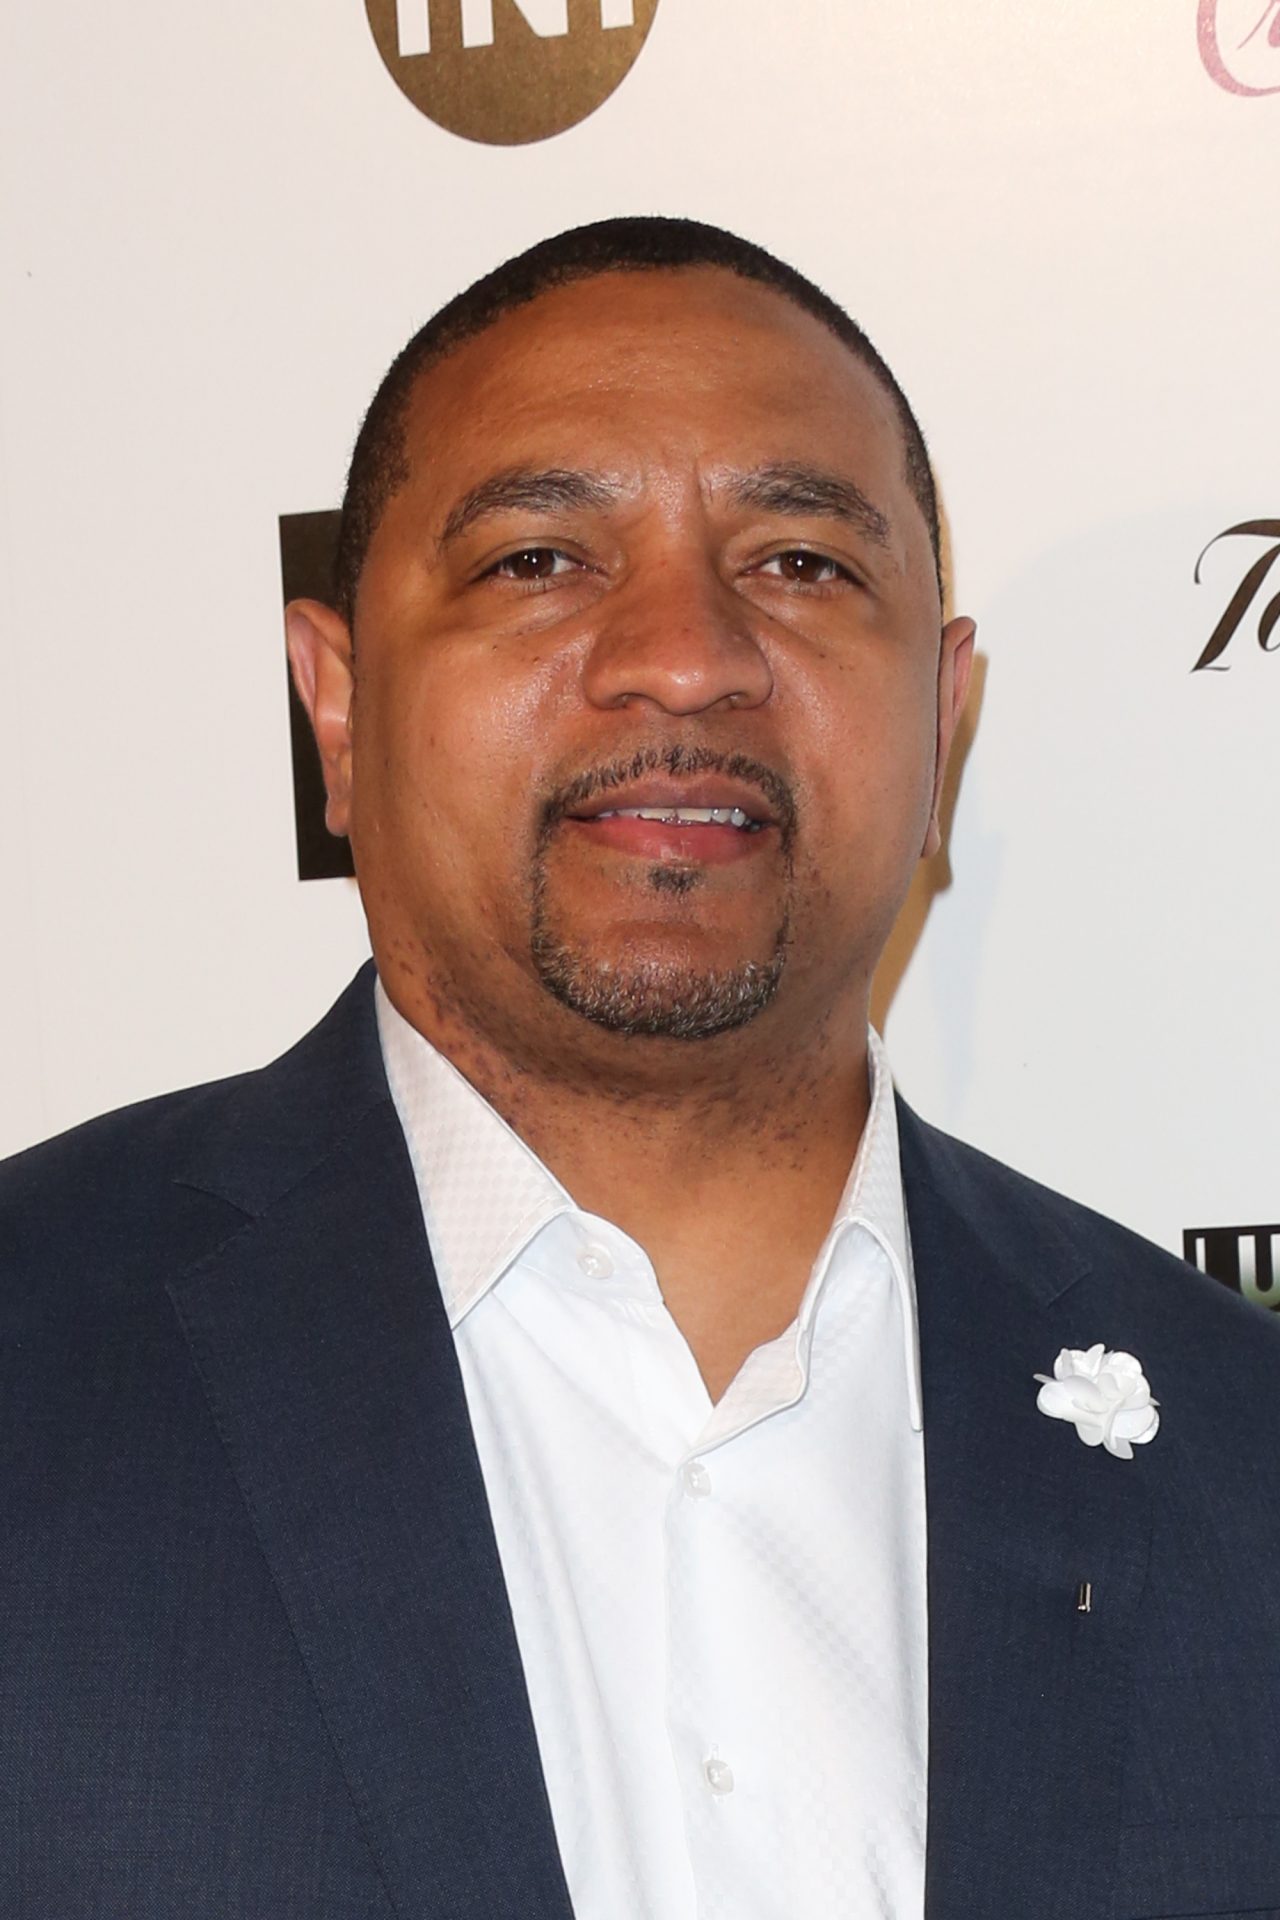 Is former NBA coach and announcer Mark Jackson being treated unfairly?